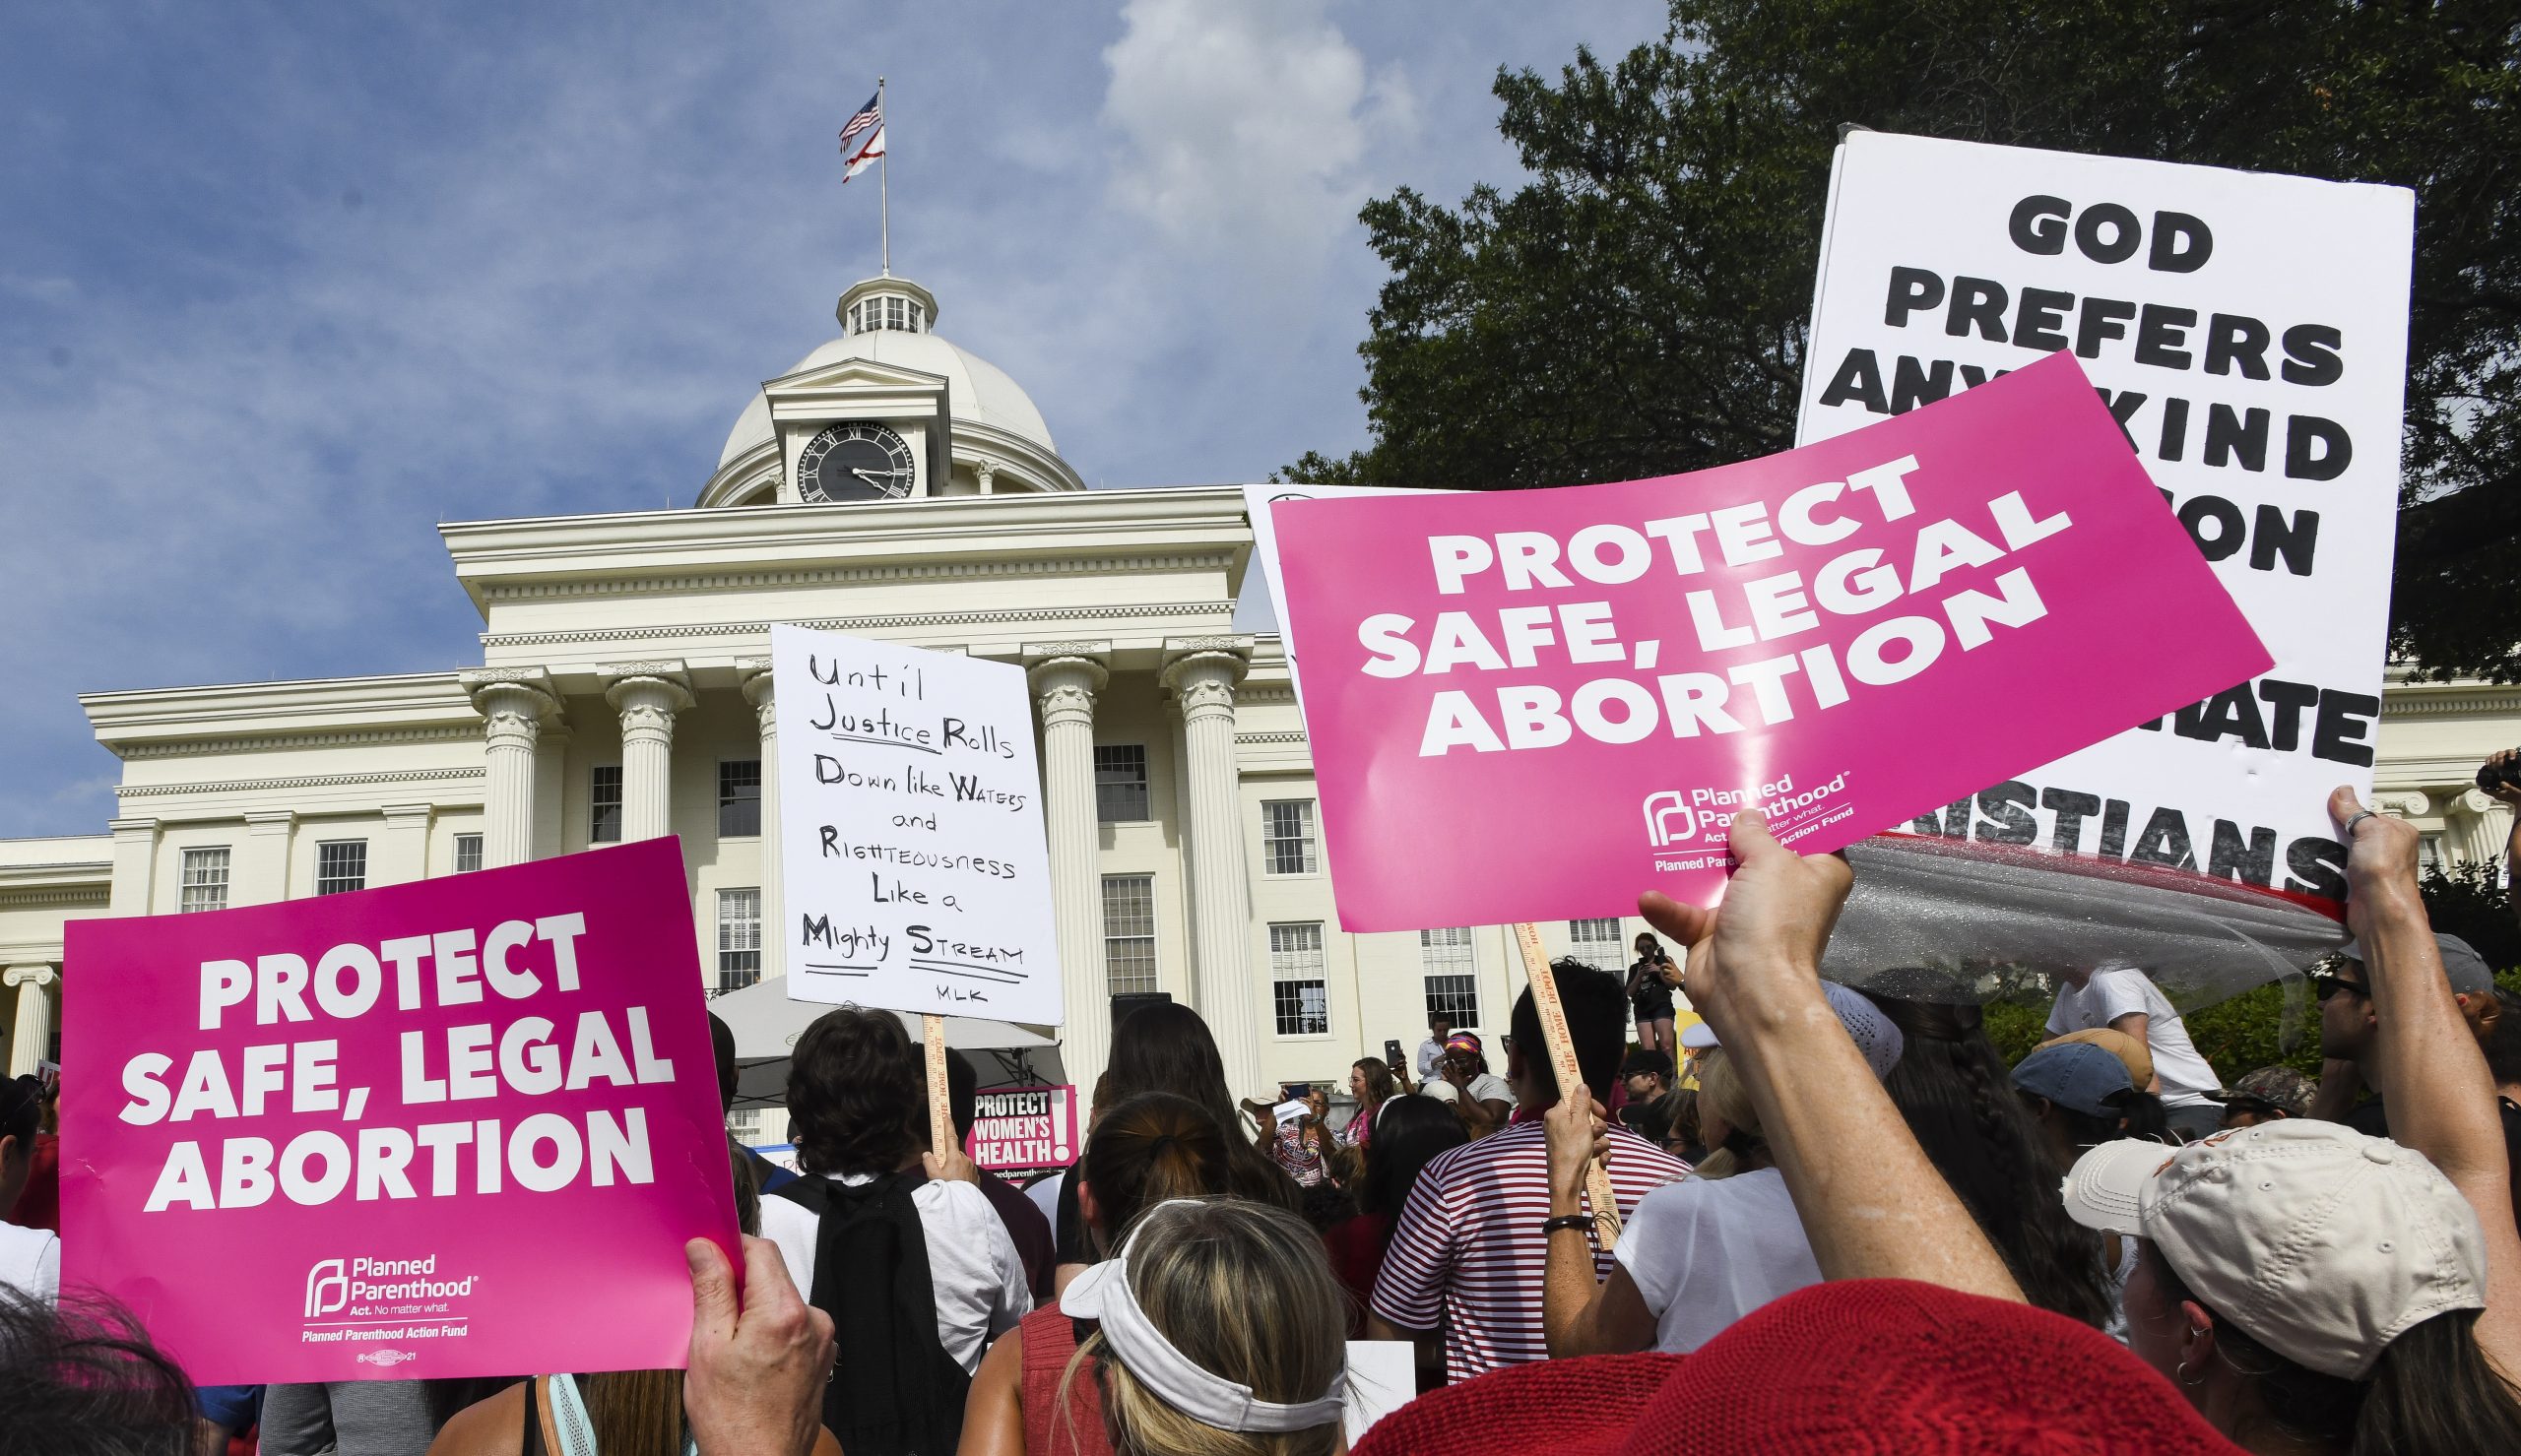 Blue-city prosecutors in red states vow not to press charges over abortions